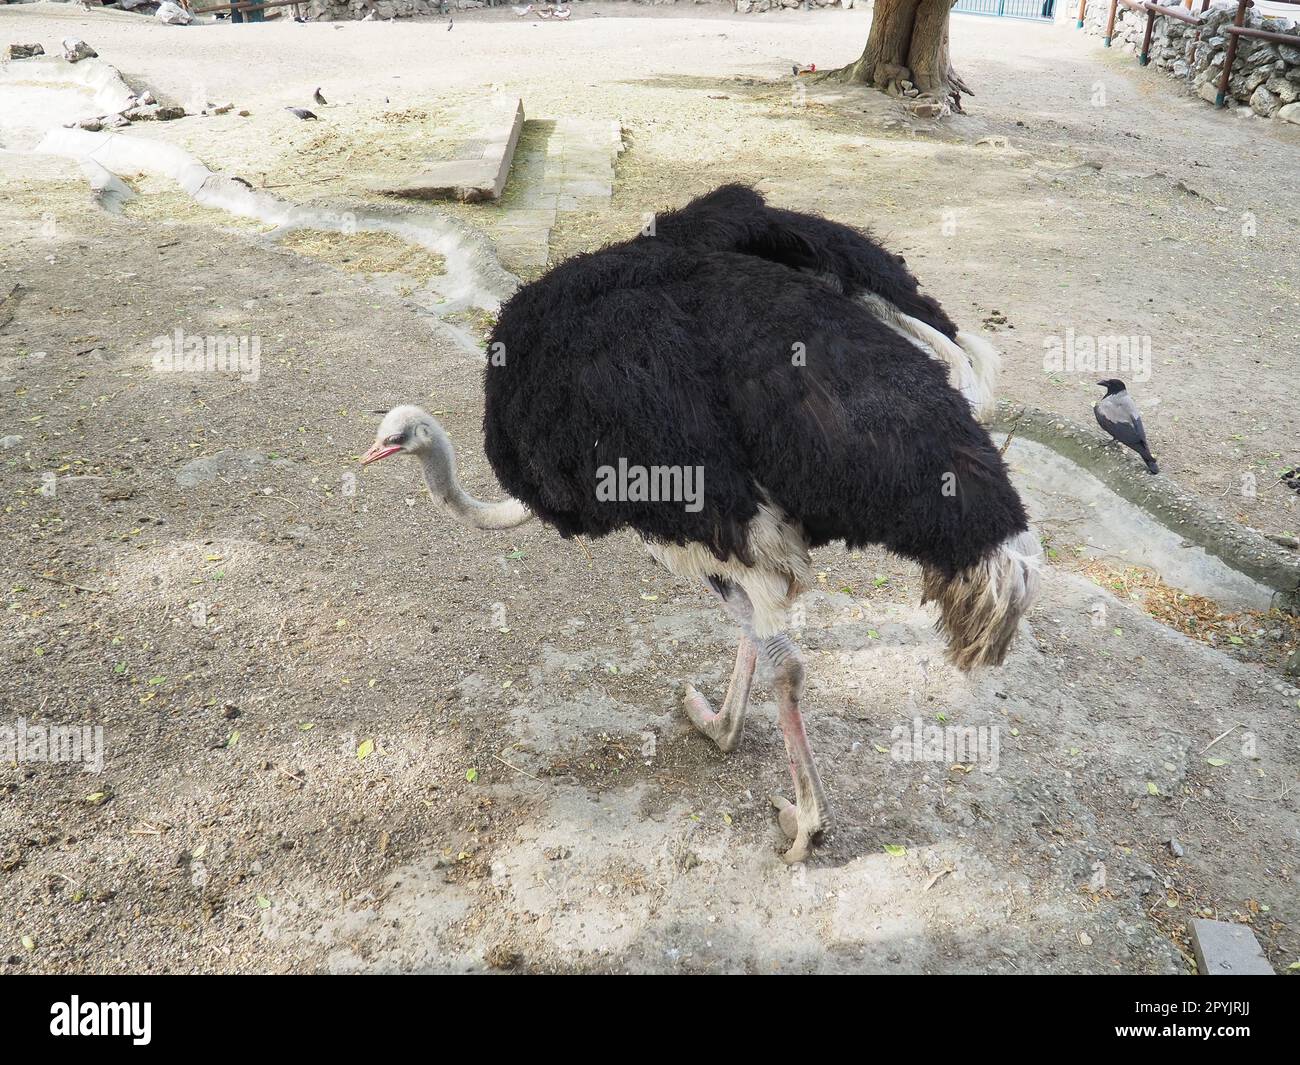 African Masai ostrich. An ostrich with black feathering on its wings and a gray neck is looking for something edible on the sand Stock Photo